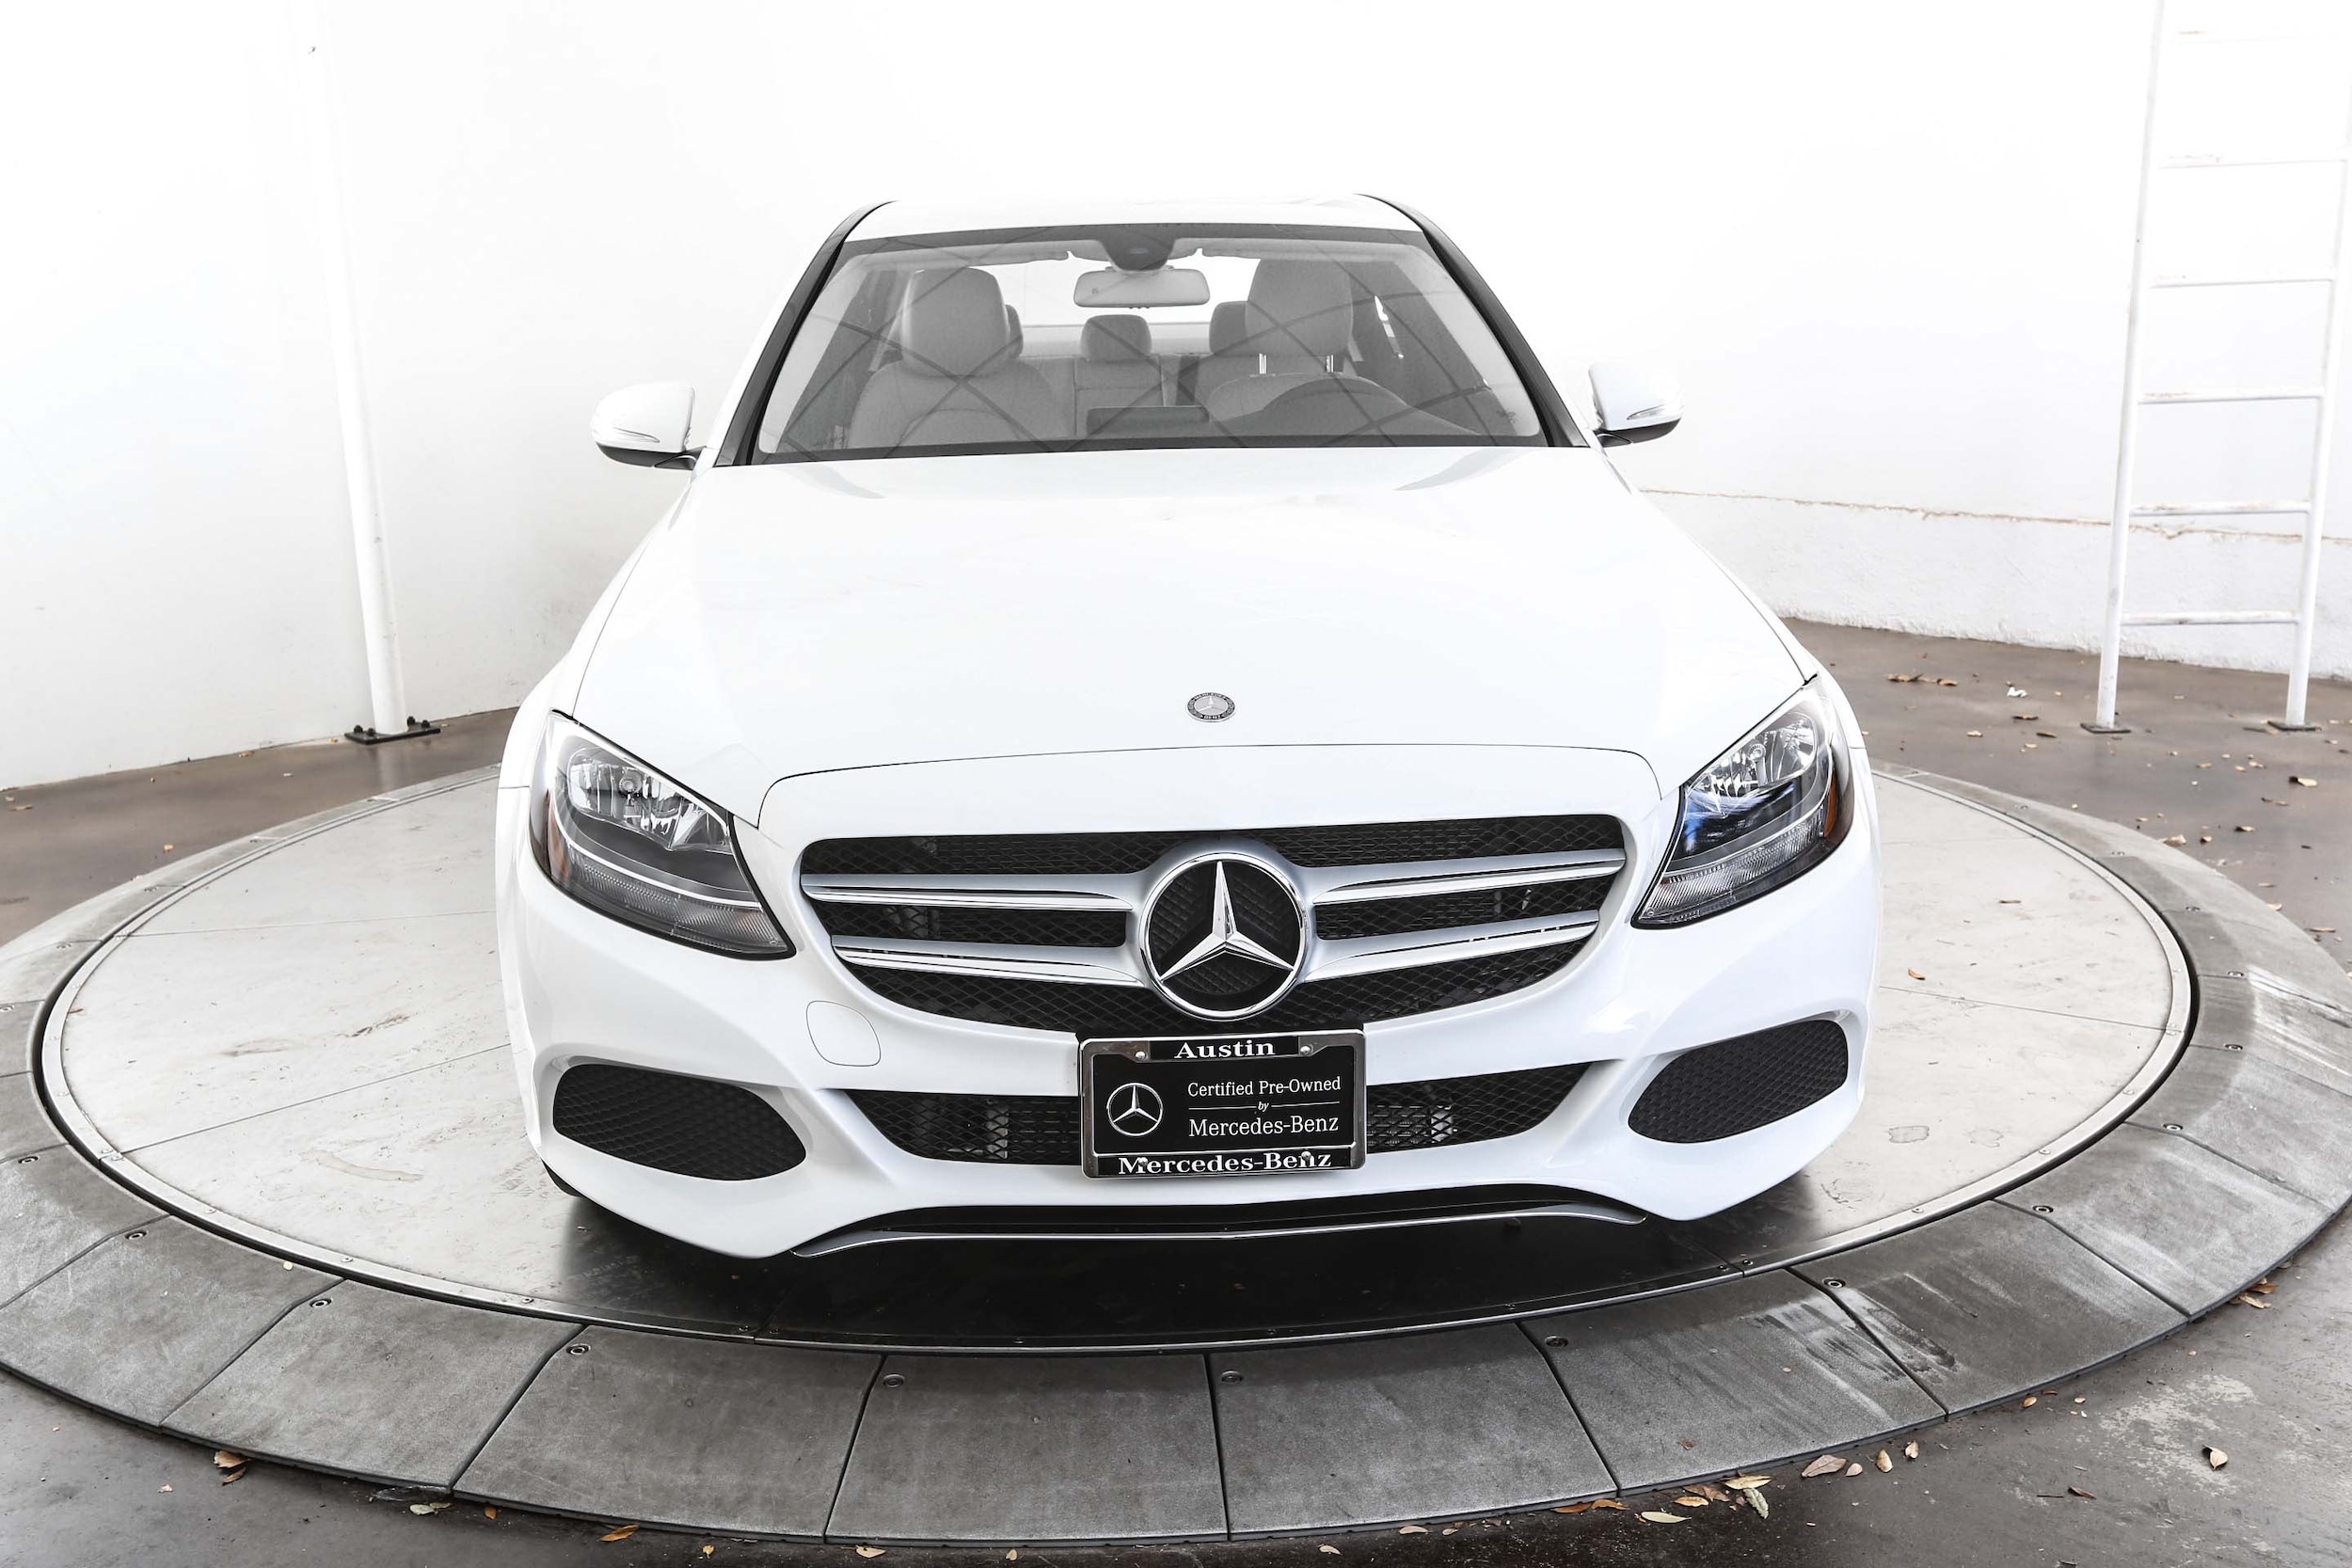 Used mercedes benz for sale in austin #5